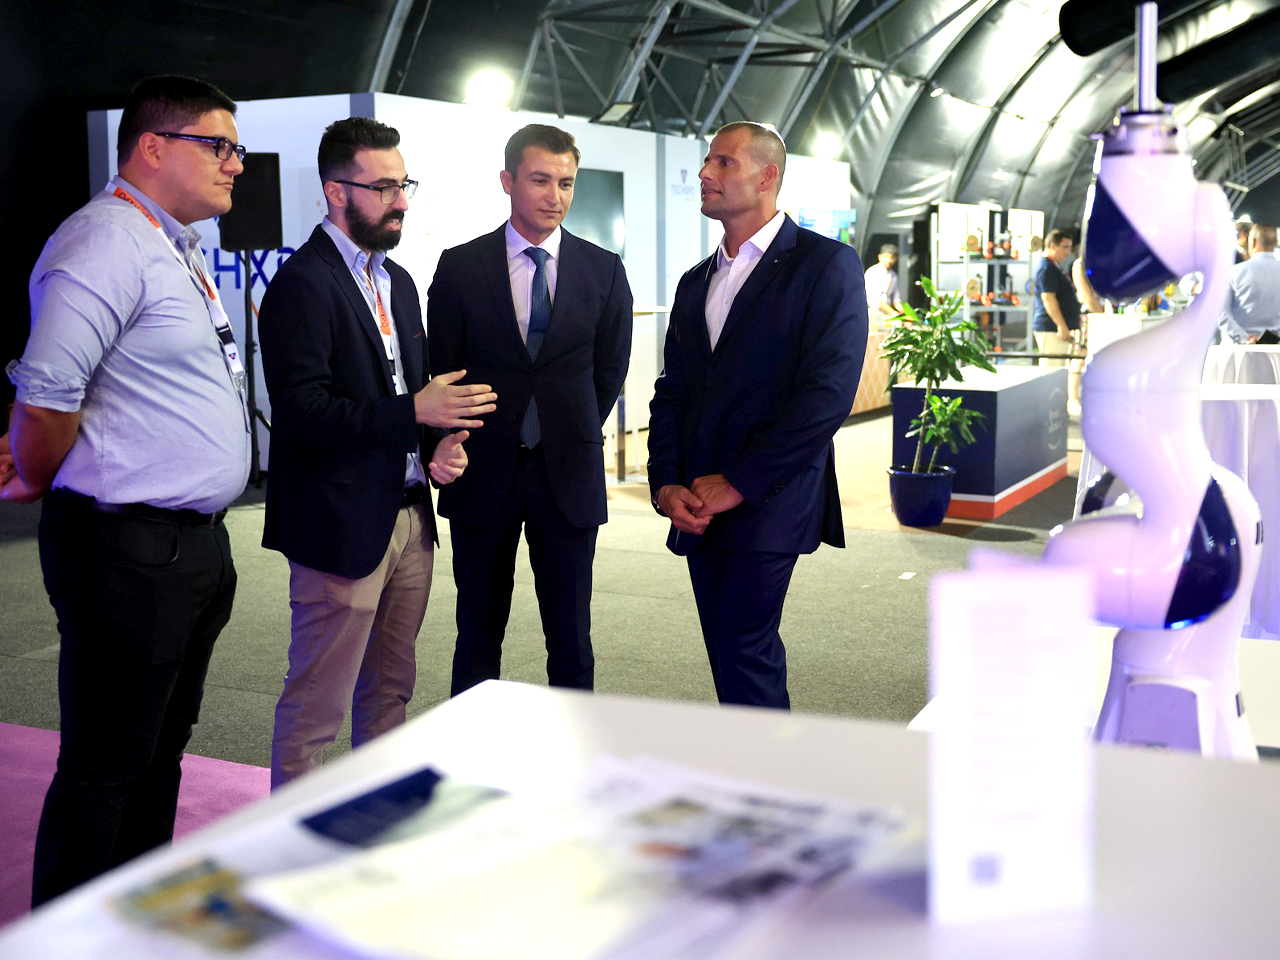 TECHXPO MALTA 2023: the IBG team in discussion with Prime Minister Robert Abela and Minister Silvio Schembri about ongoing developments at IBG Automation Malta.